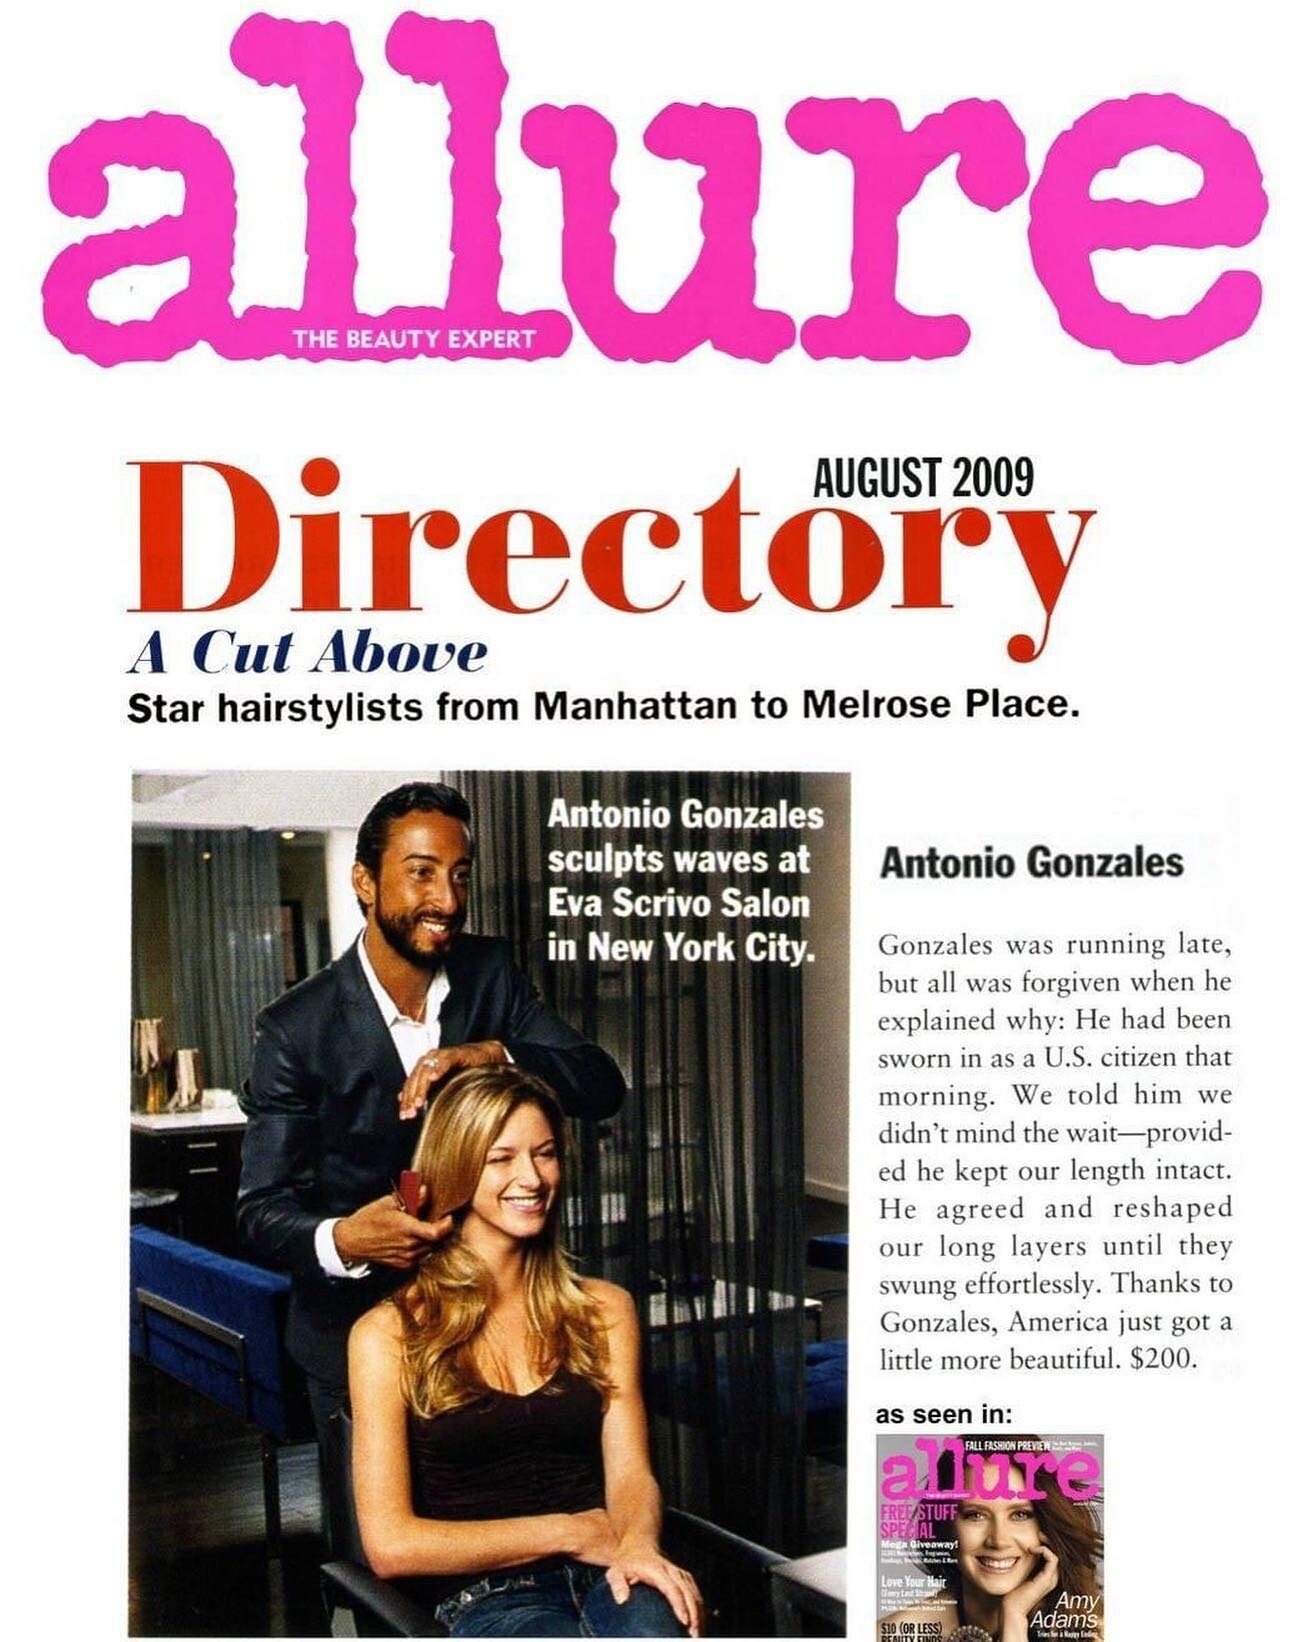 #ThrowbackThursday

This was a HUGE day for me, not only did I get my citizenship, I was also featured in @allure as 
&ldquo;A Cut Above: Star Hairstylists from Manhattan to Melrose Place!&rdquo; 🥰✨

It was 2009 and my haircuts were $200! Honestly, 